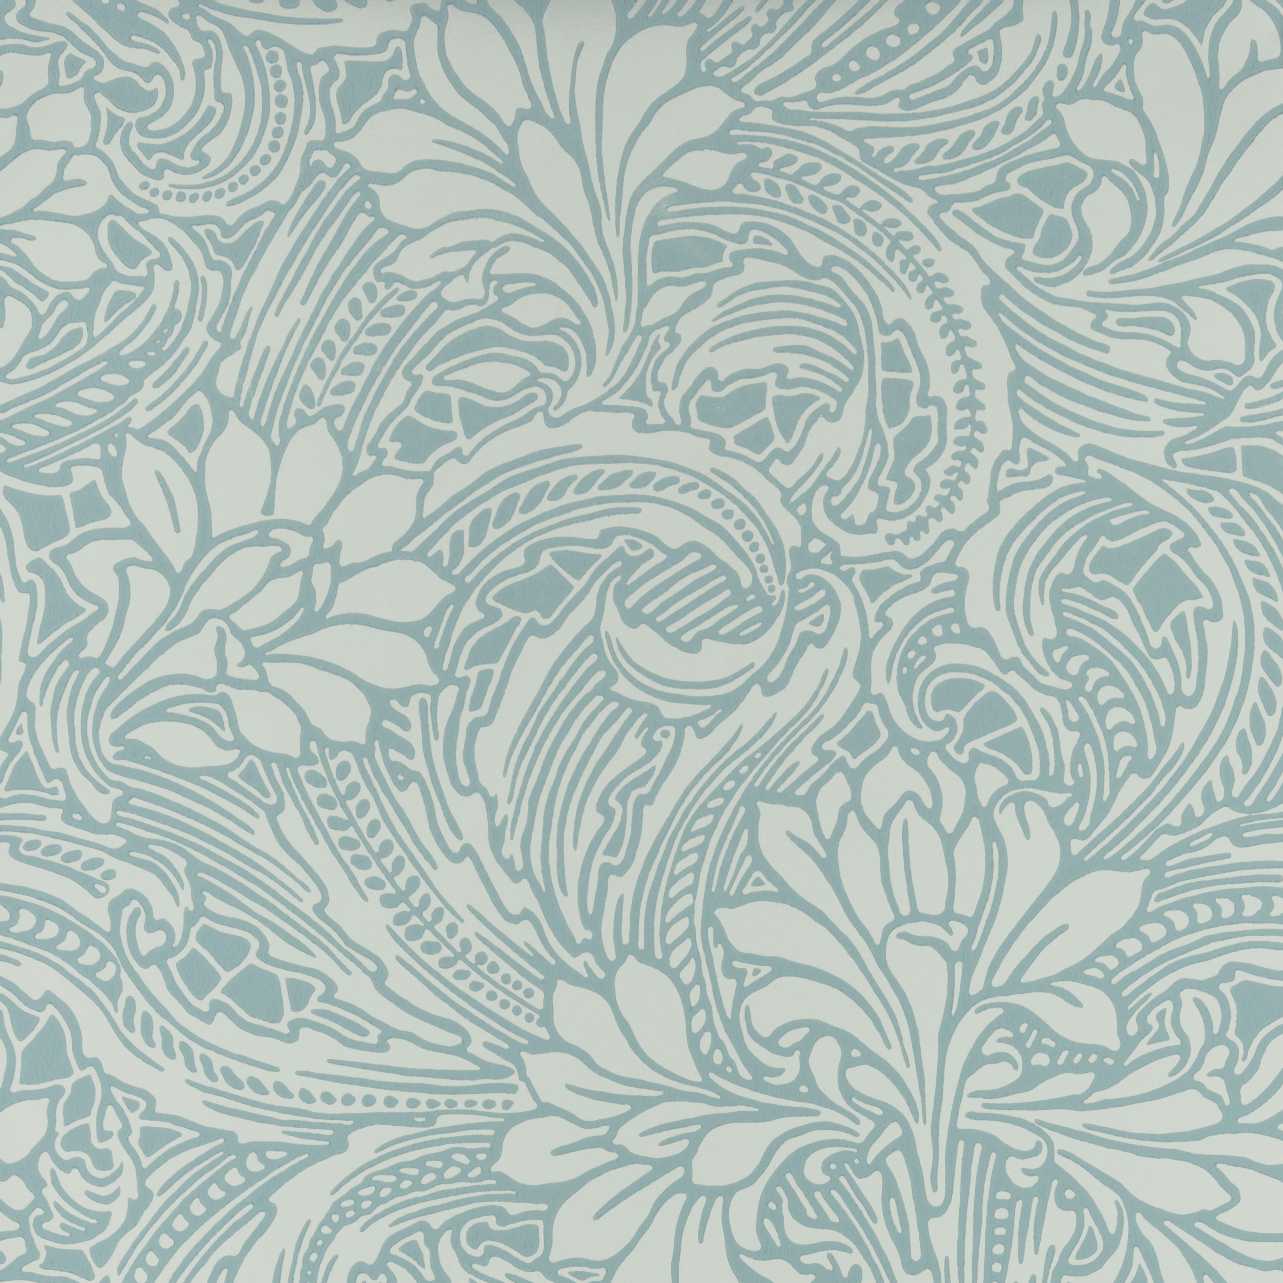 images/productimages/small/2311-173-03-eden-soft-teal-swatch.jpg